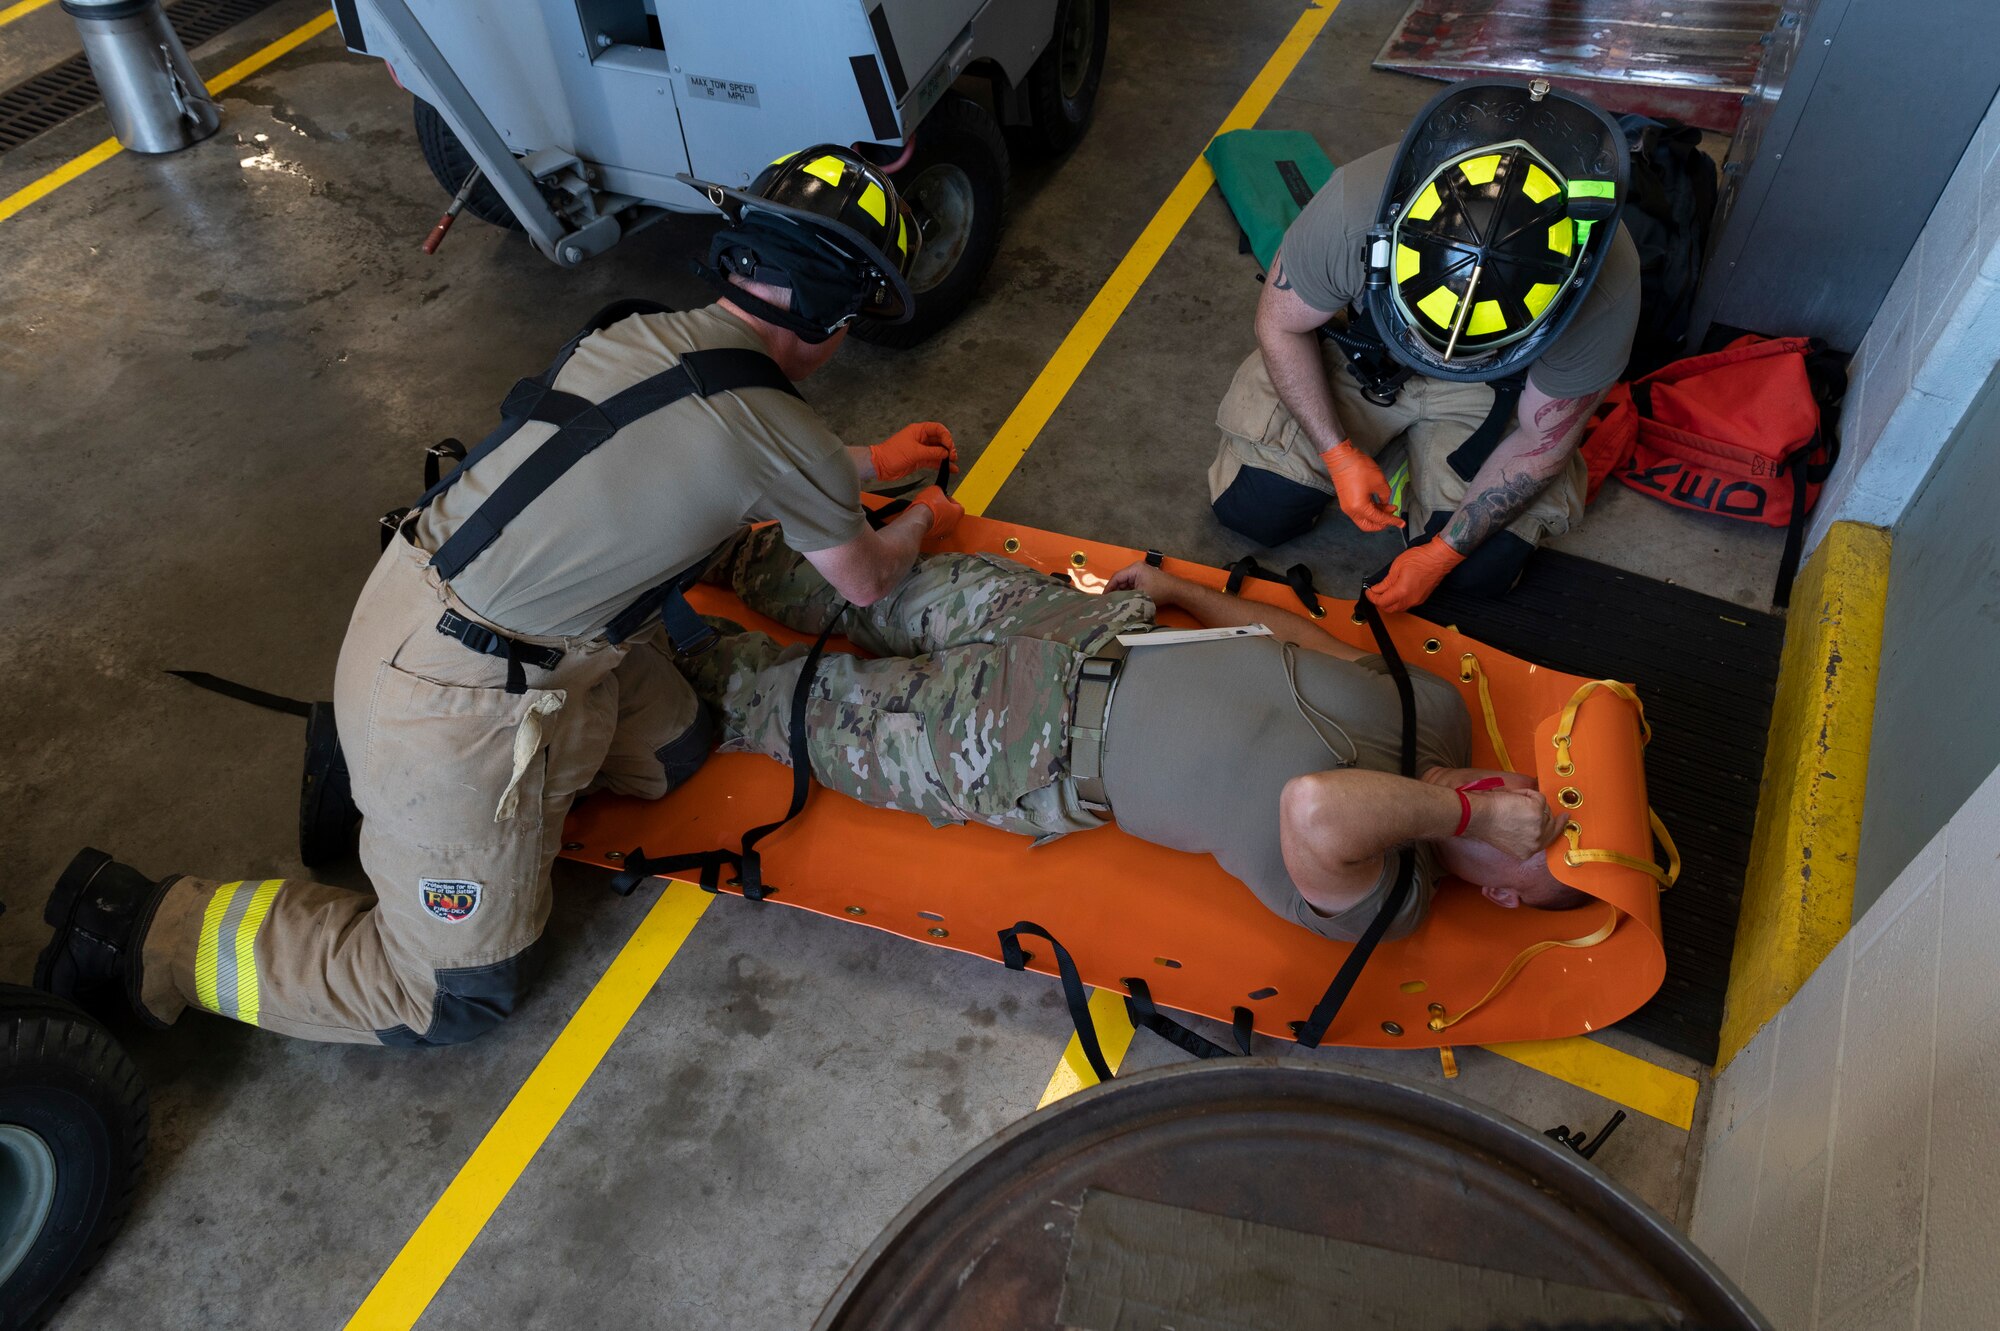 167th Airlift Wing Firefighters prepare a simulated victim to be moved during an active shooter simulation, at 167th Airlift Wing, Martinsburg, West Virginia, Aug. 7, 2022. Airmen with the 167th Airlift Wing participate in active shooter training scenarios annually, strengthening the coordination between security forces and firefighters.